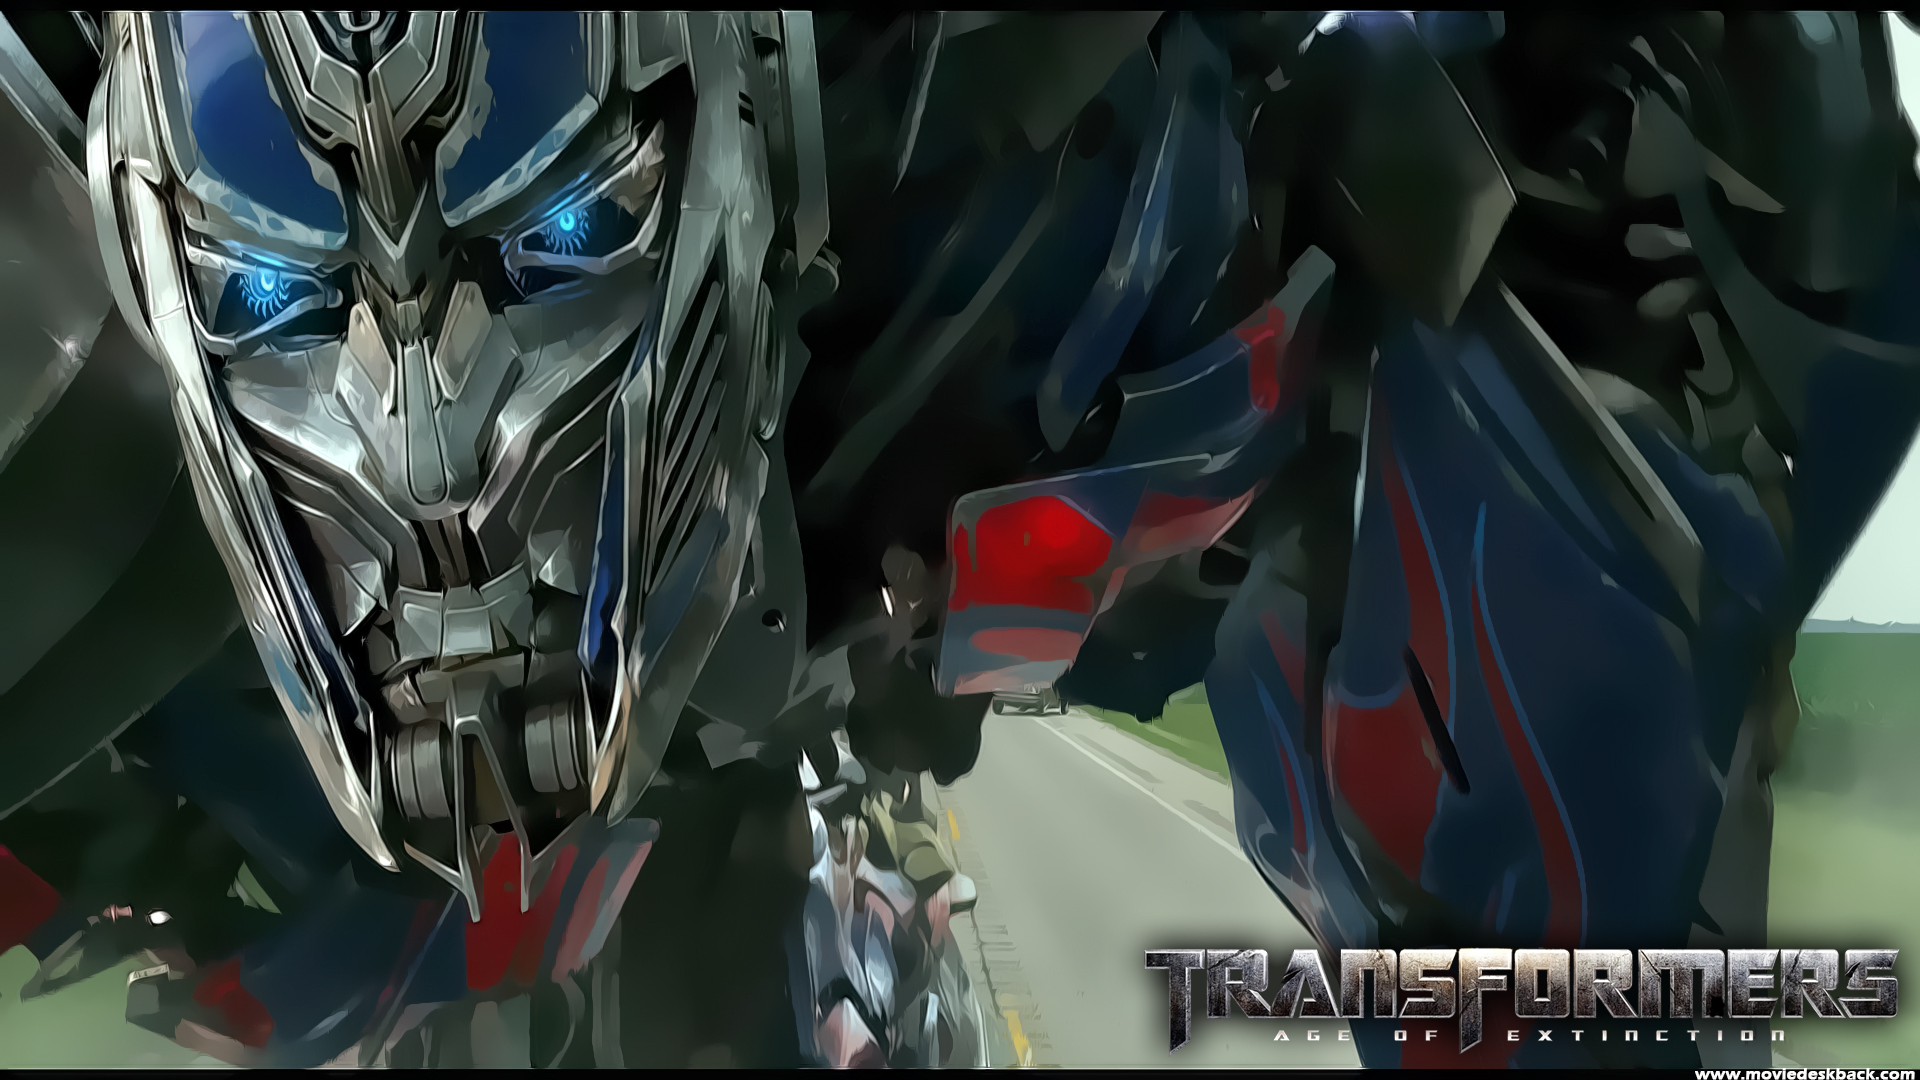  Transformers Age of Extinction Full HD wallpapers All images are